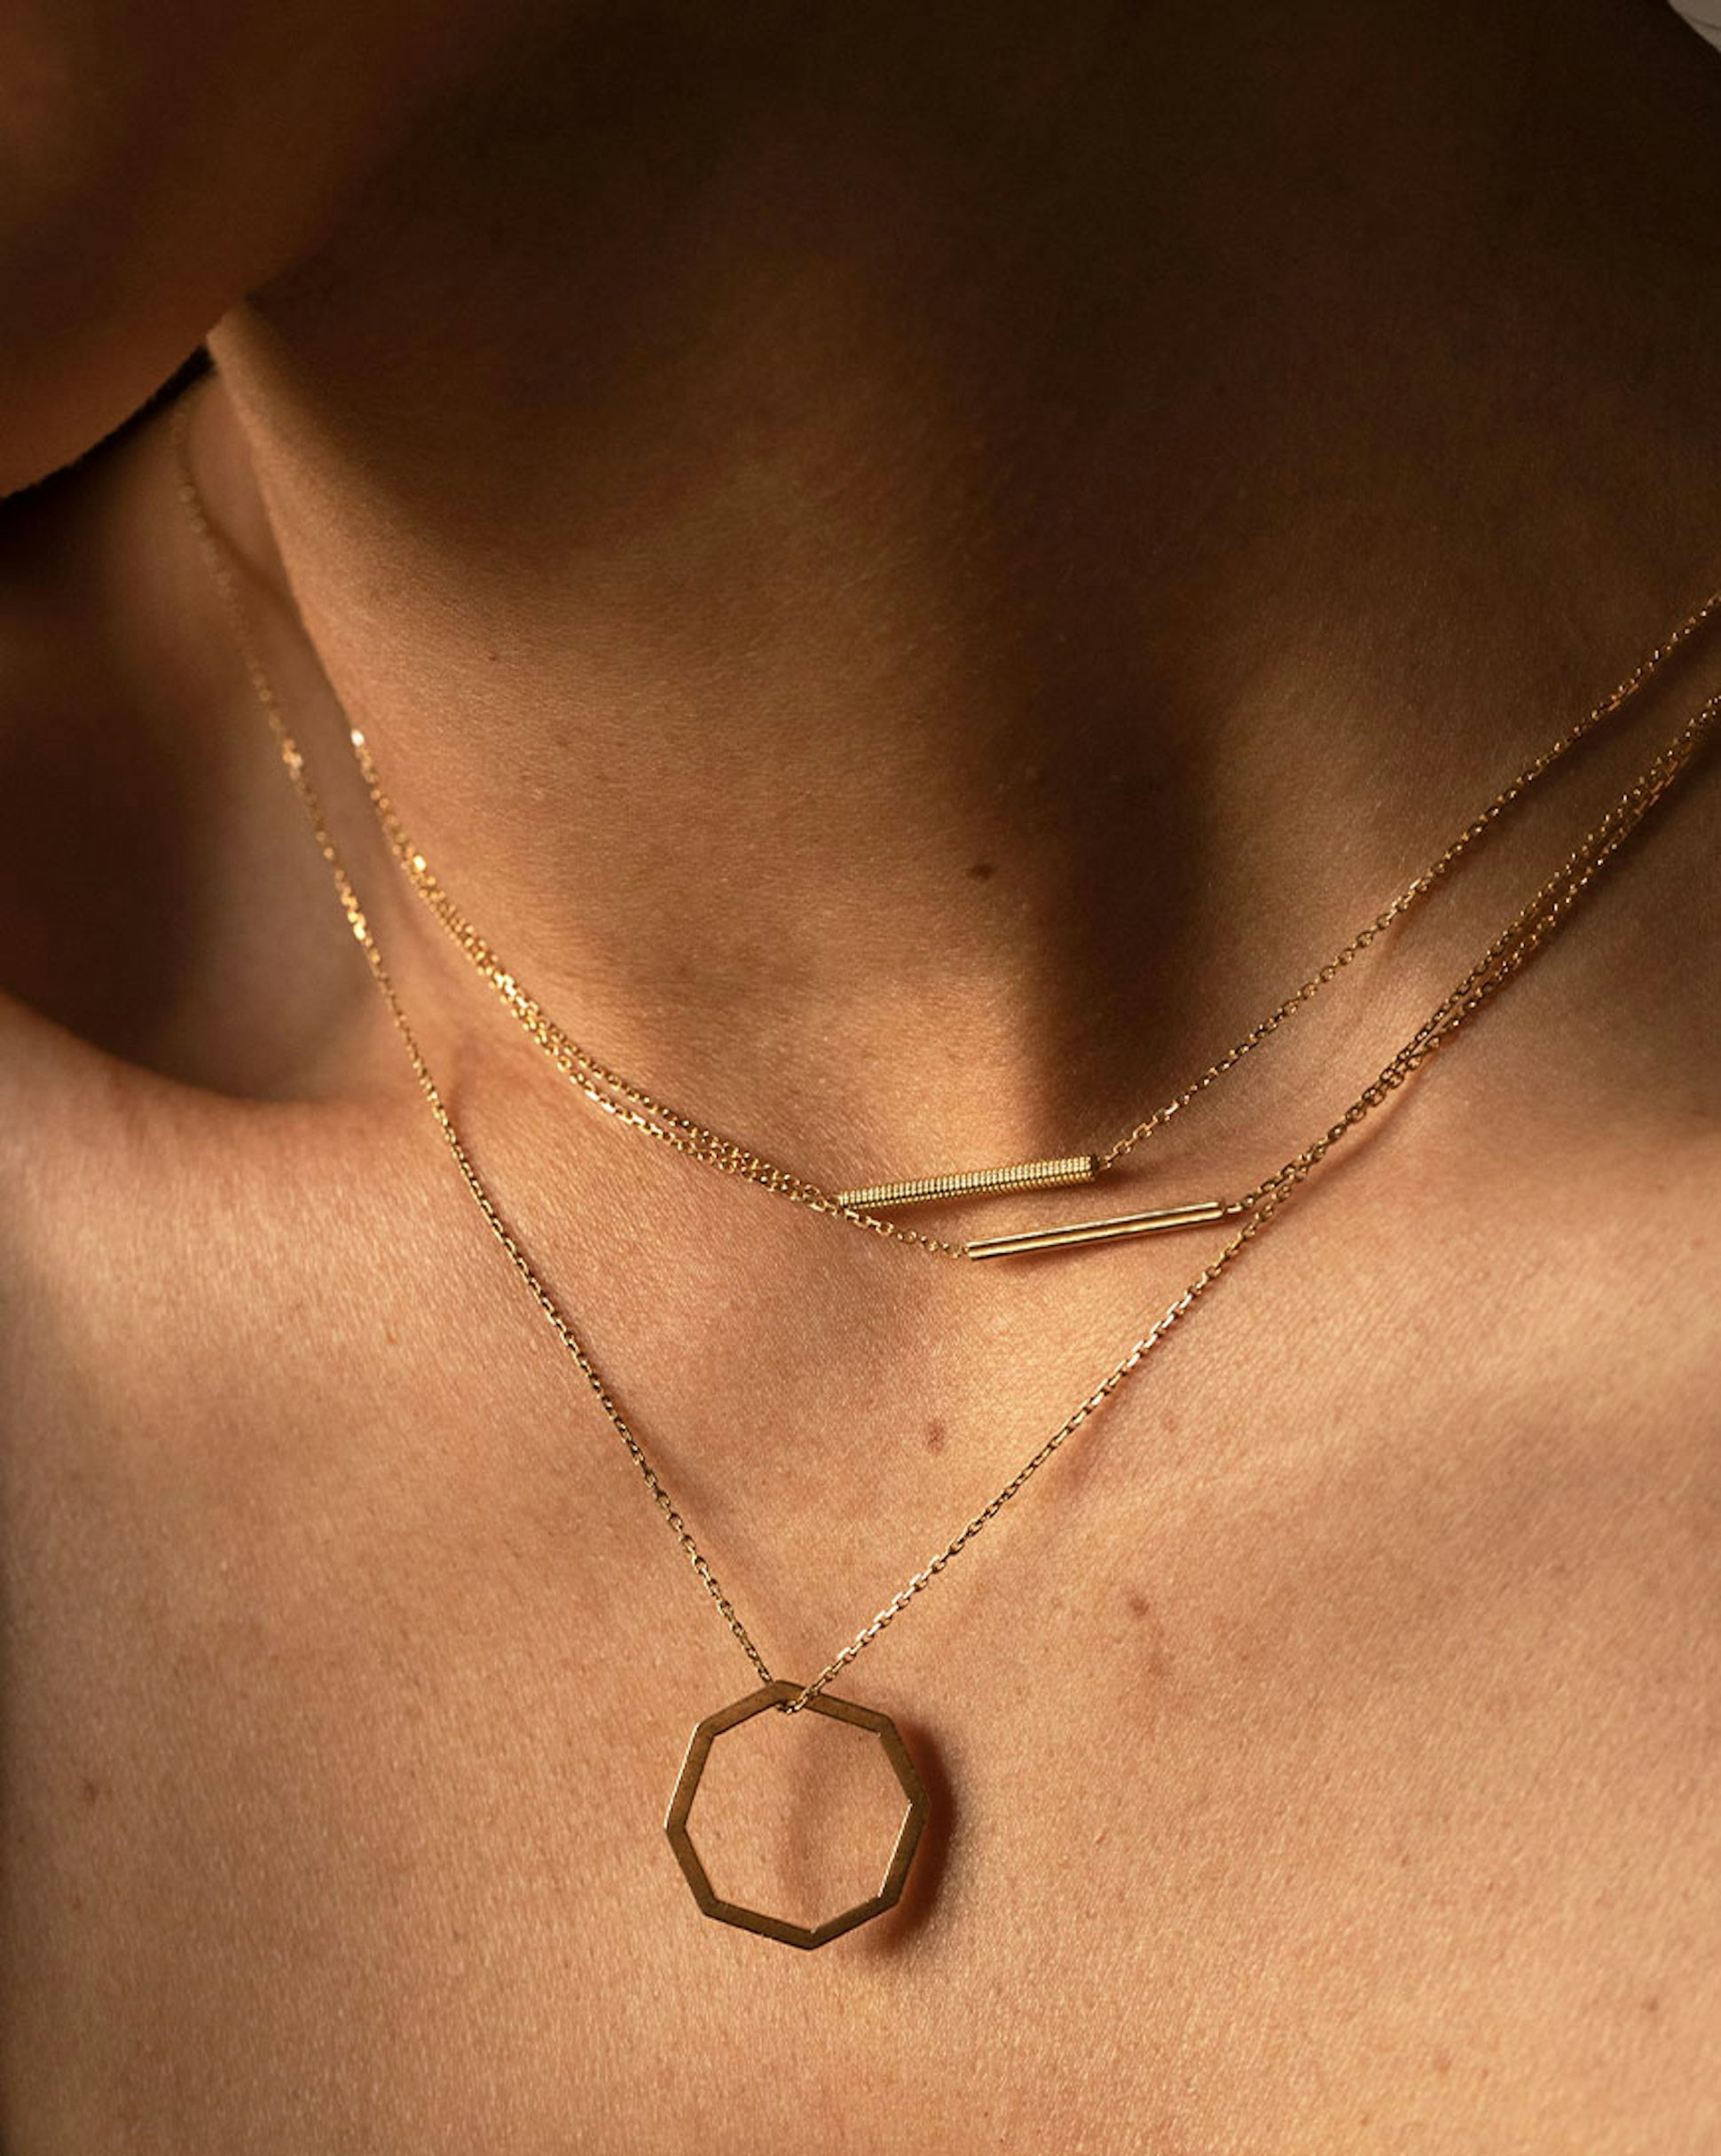 Octogone and Anagramme necklaceS in Fairmined-certified ethical yellow gold paved | JEM Jewellery Ethically Minded 